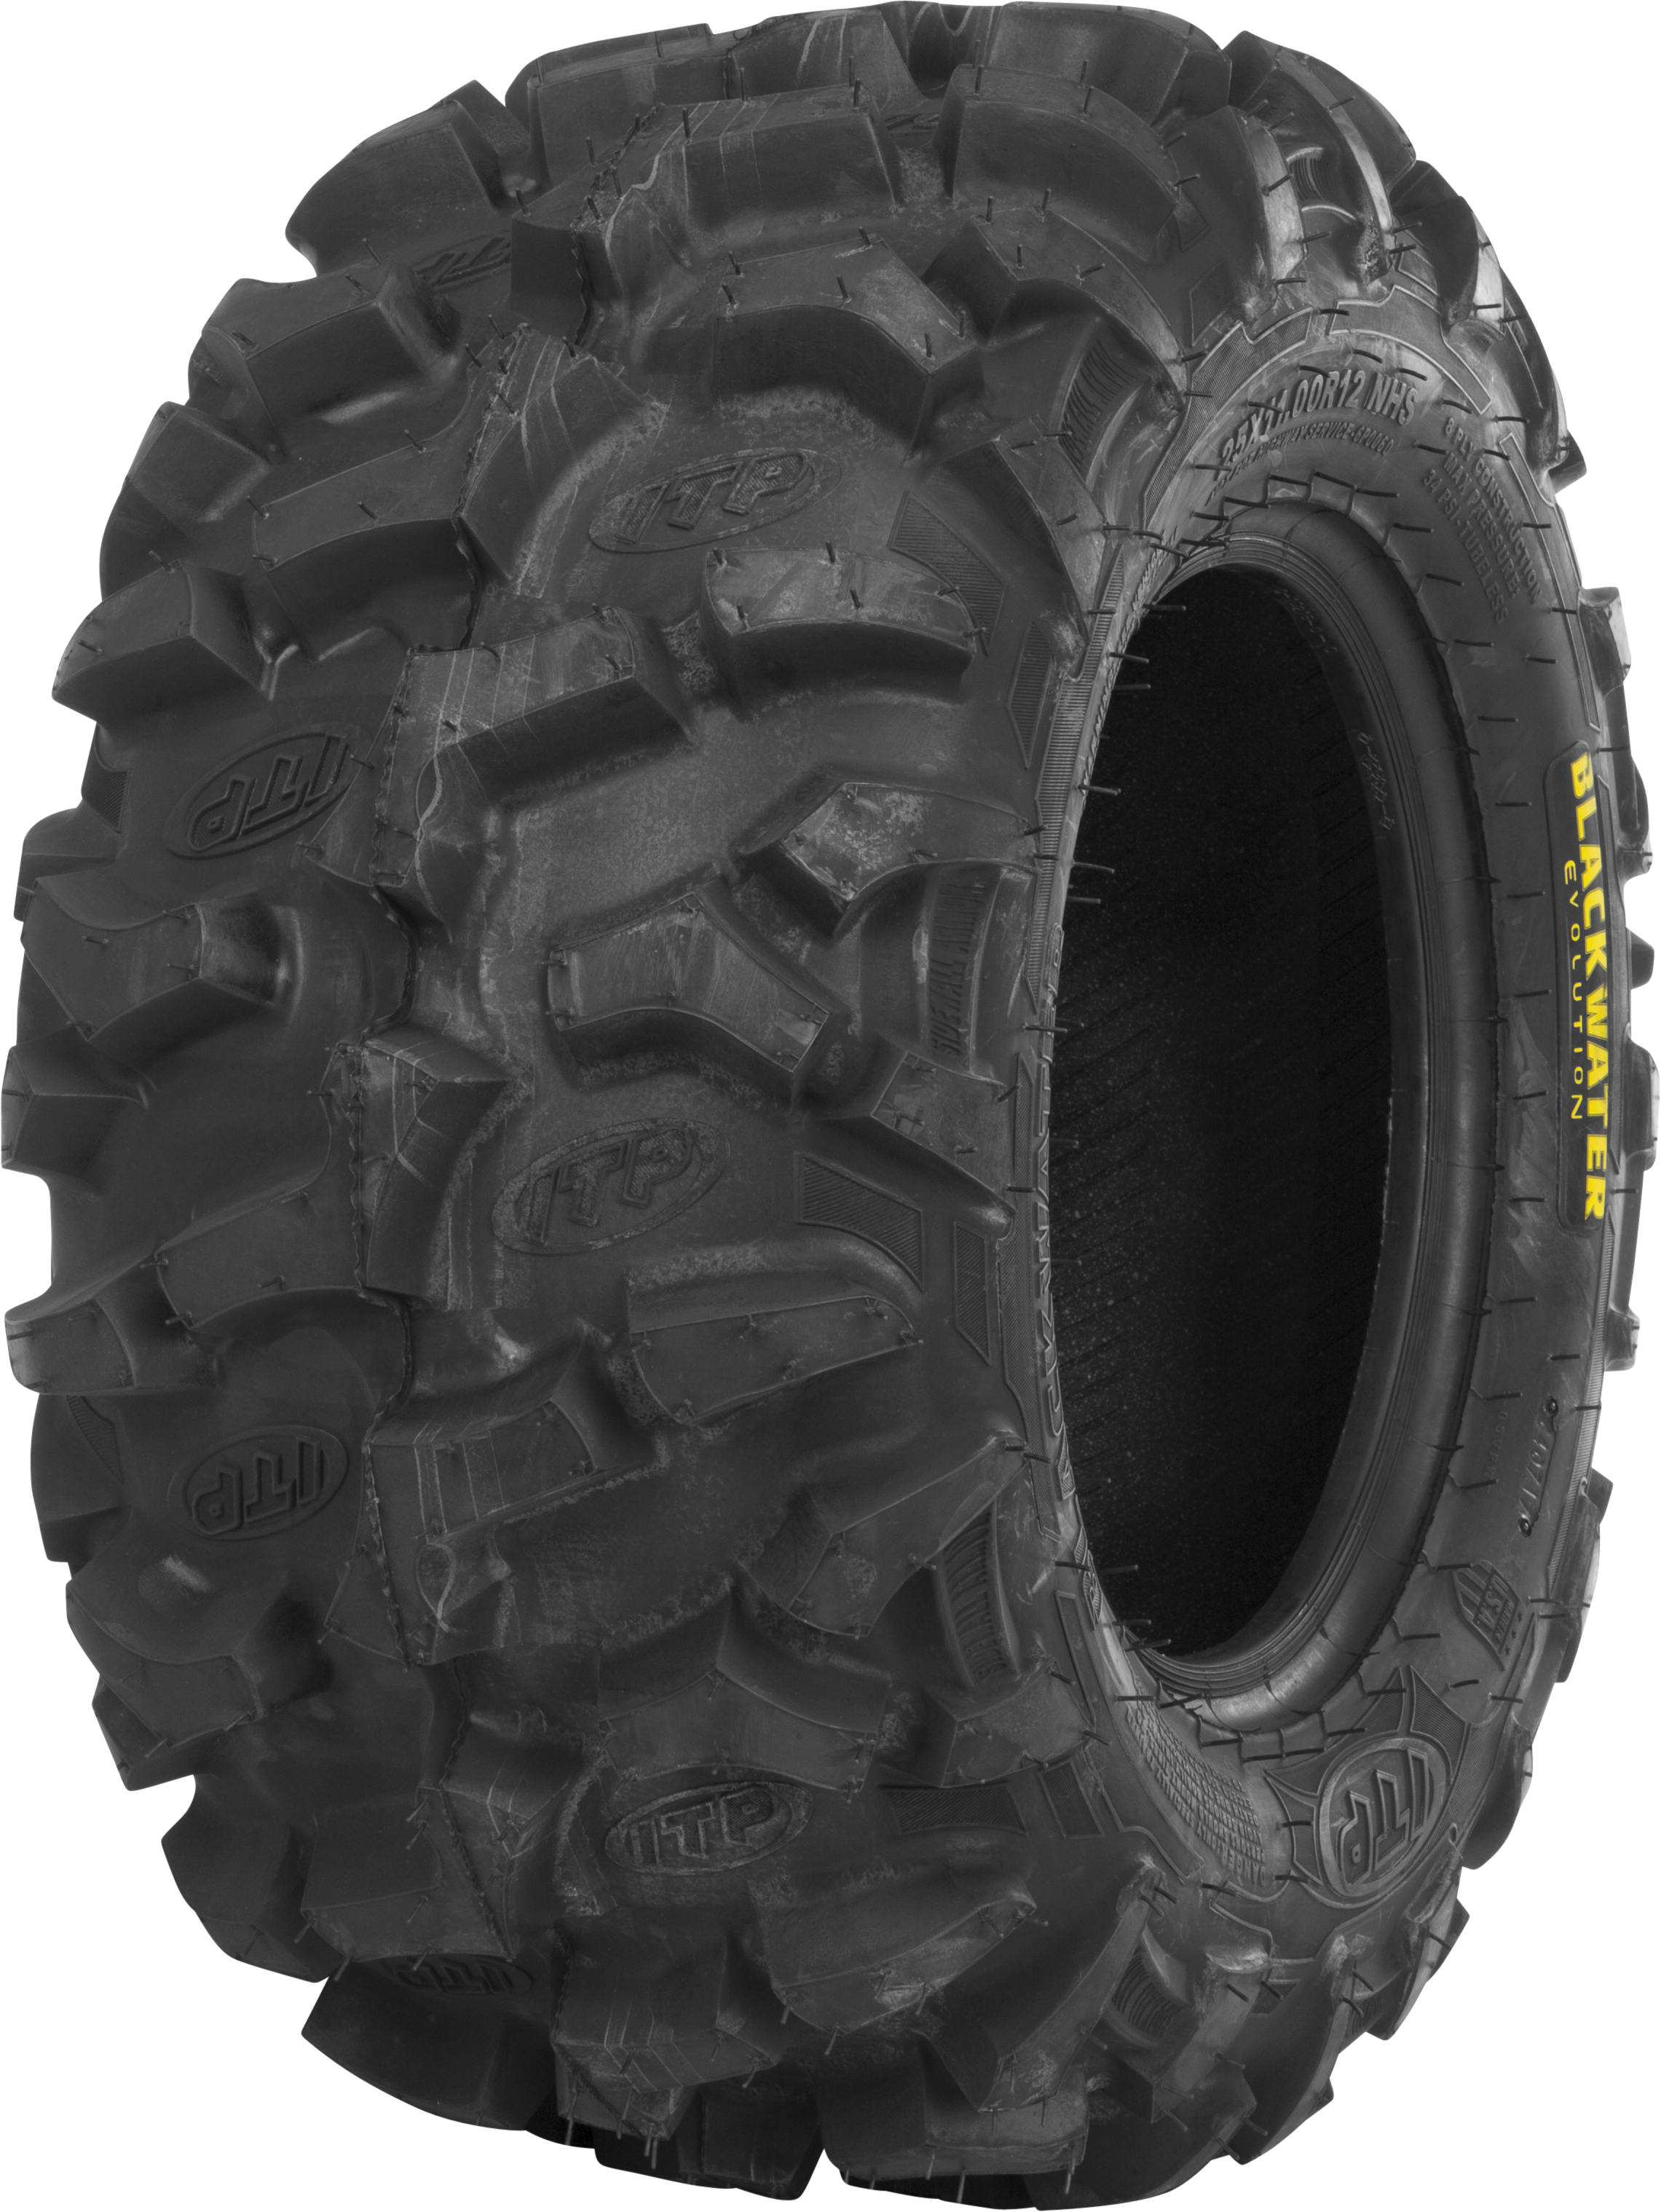 Blackwater Evolution Rear Tire 28X11R-14 8-PLY - Click Image to Close